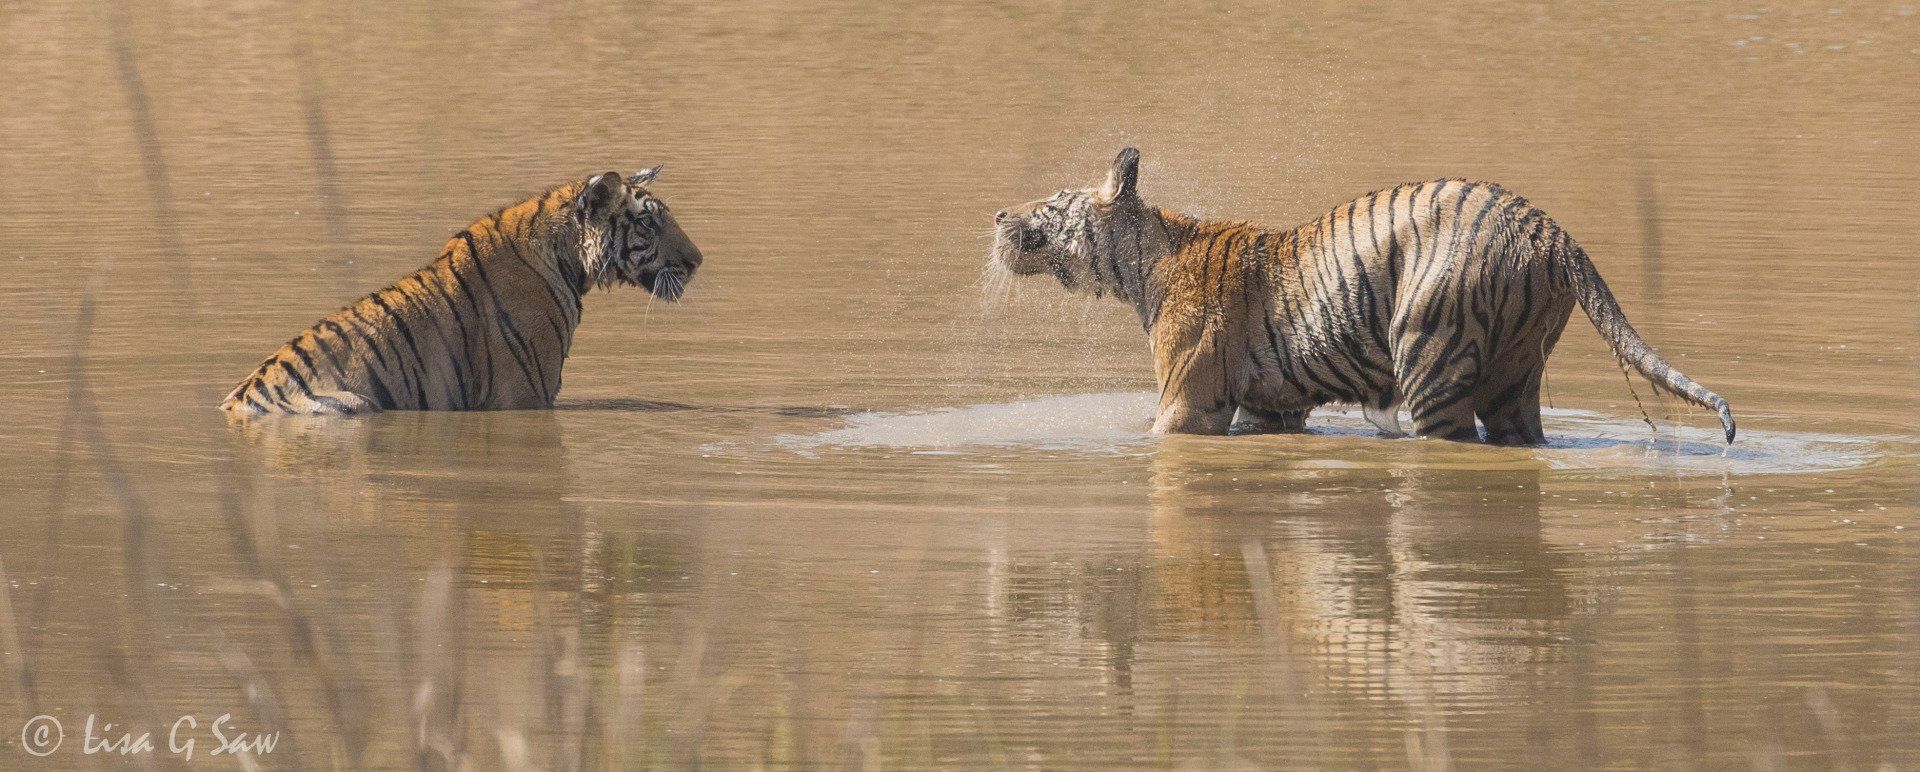 Two tigers in water, one shaking off water